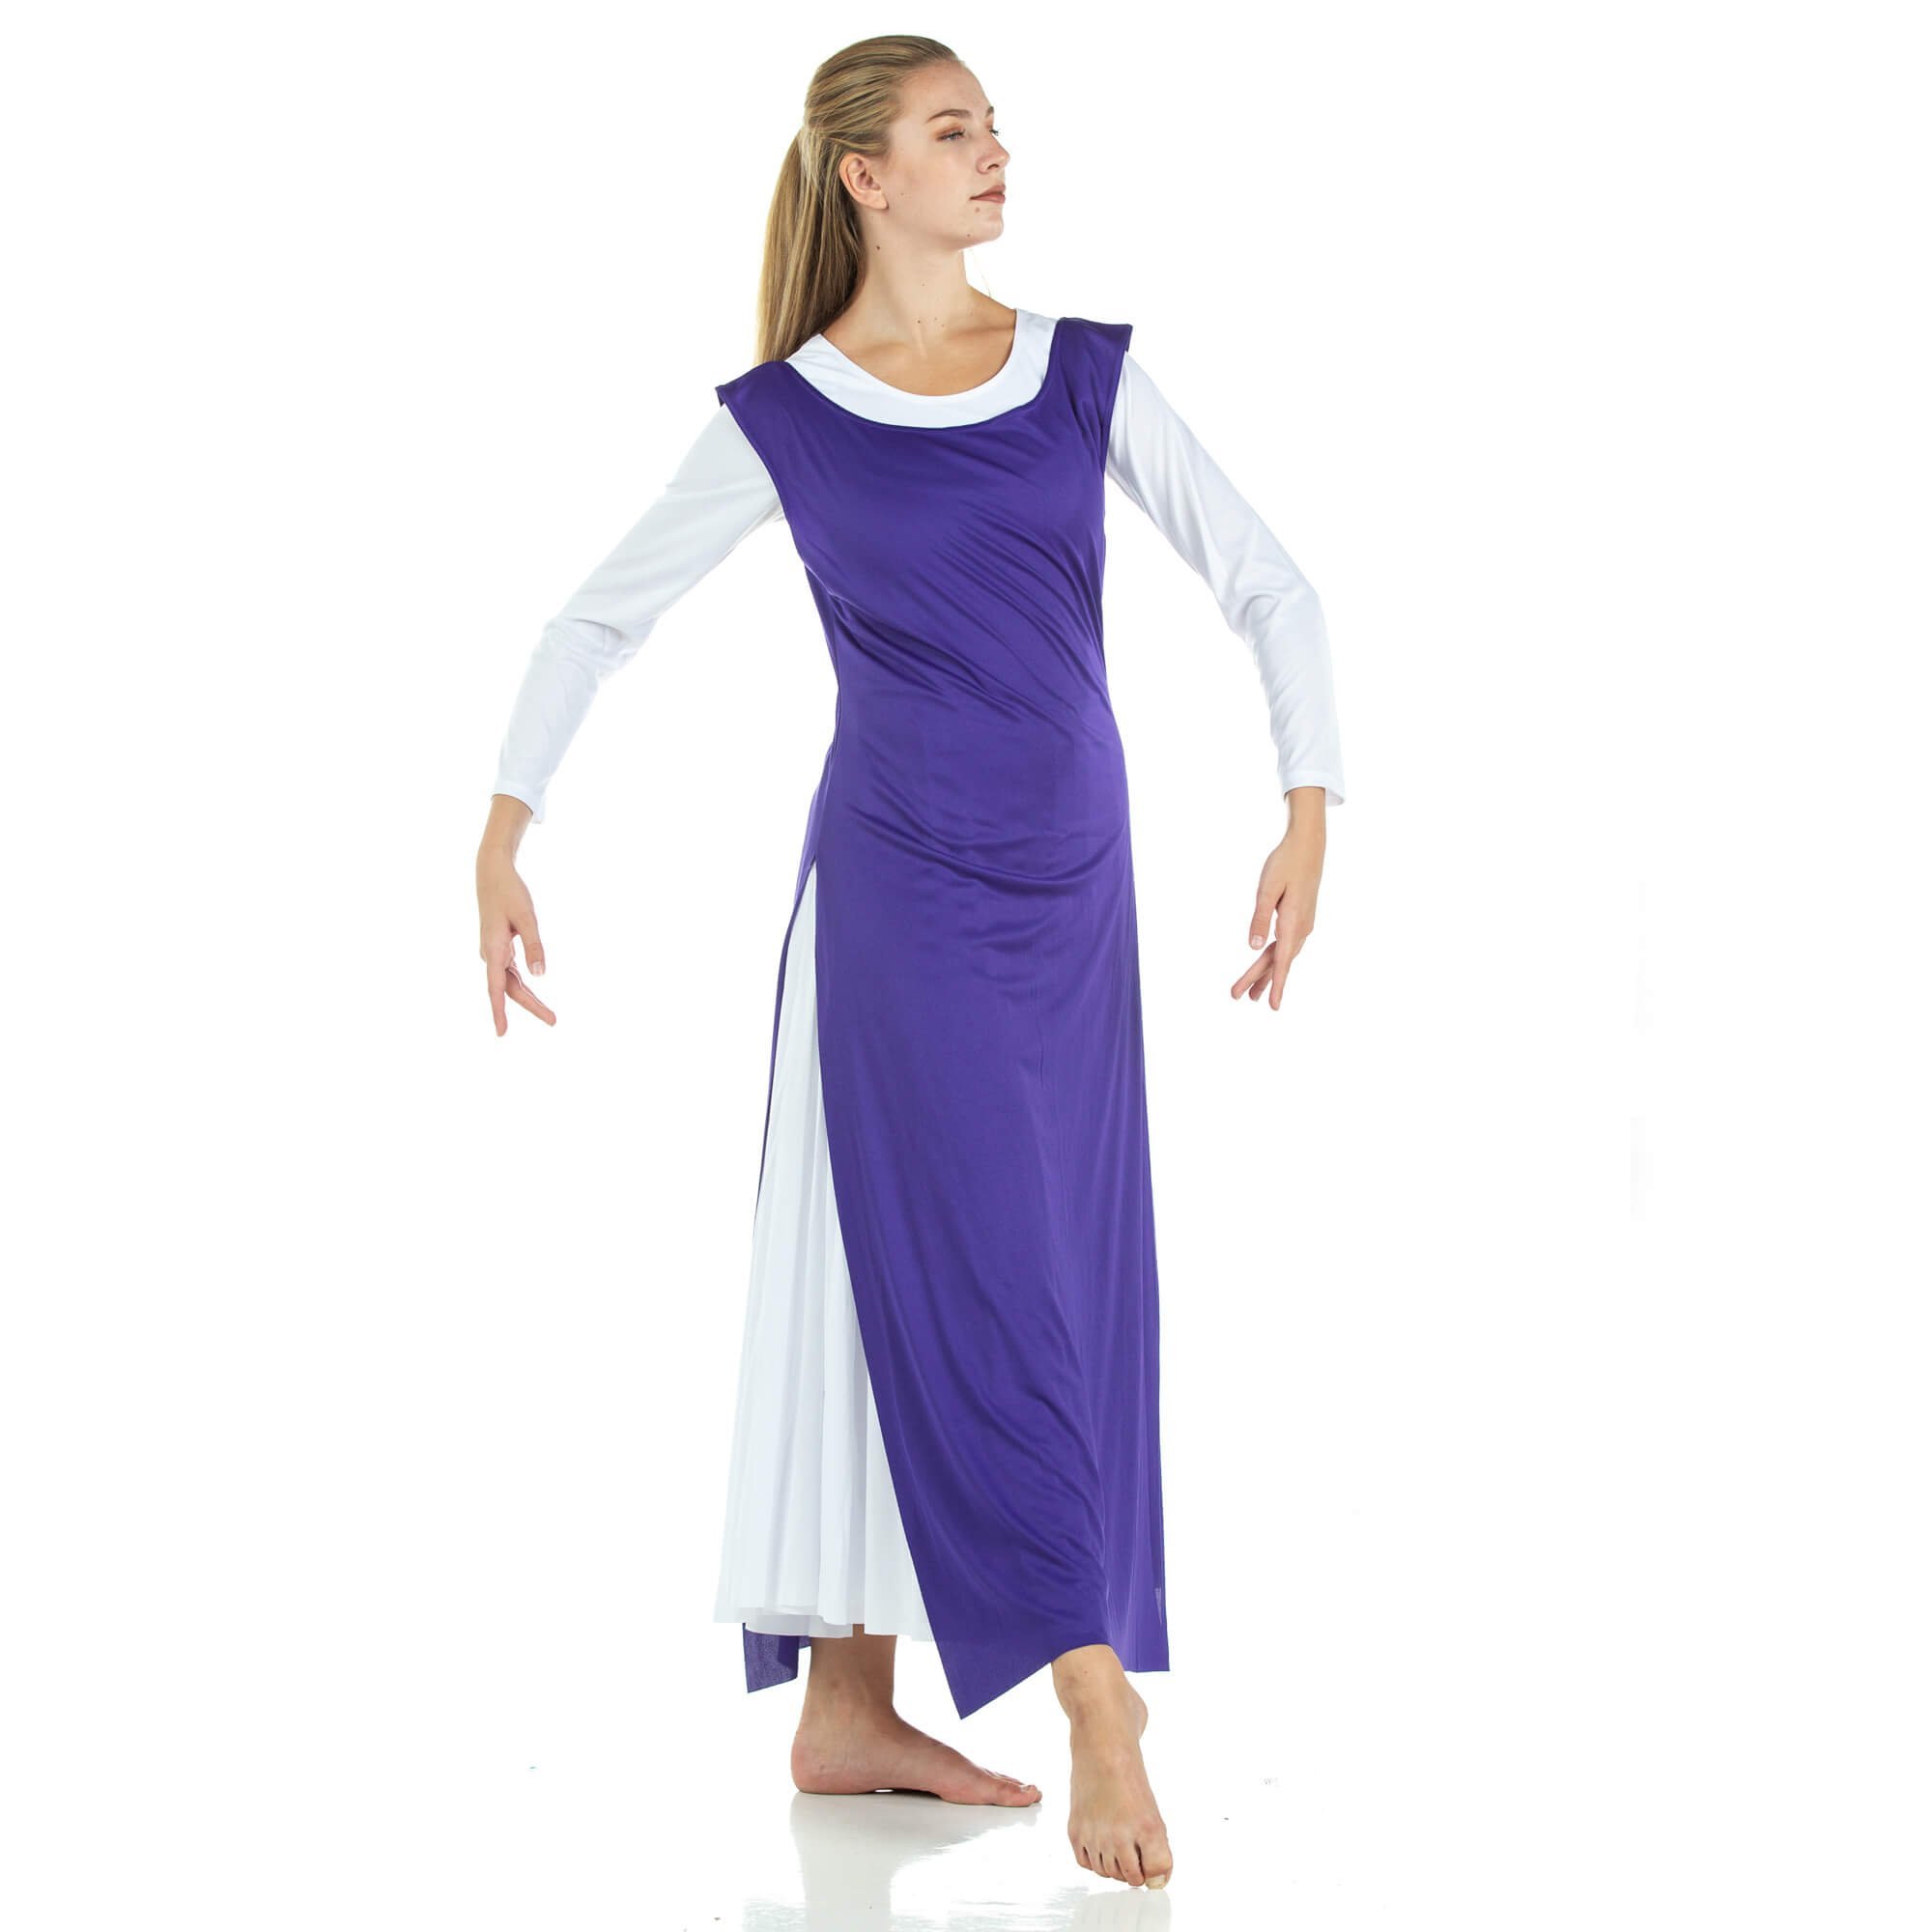 2-pc Set Danzcue Praise Full Length Long Sleeve Dance Dress Tunic with Side Slits - Click Image to Close